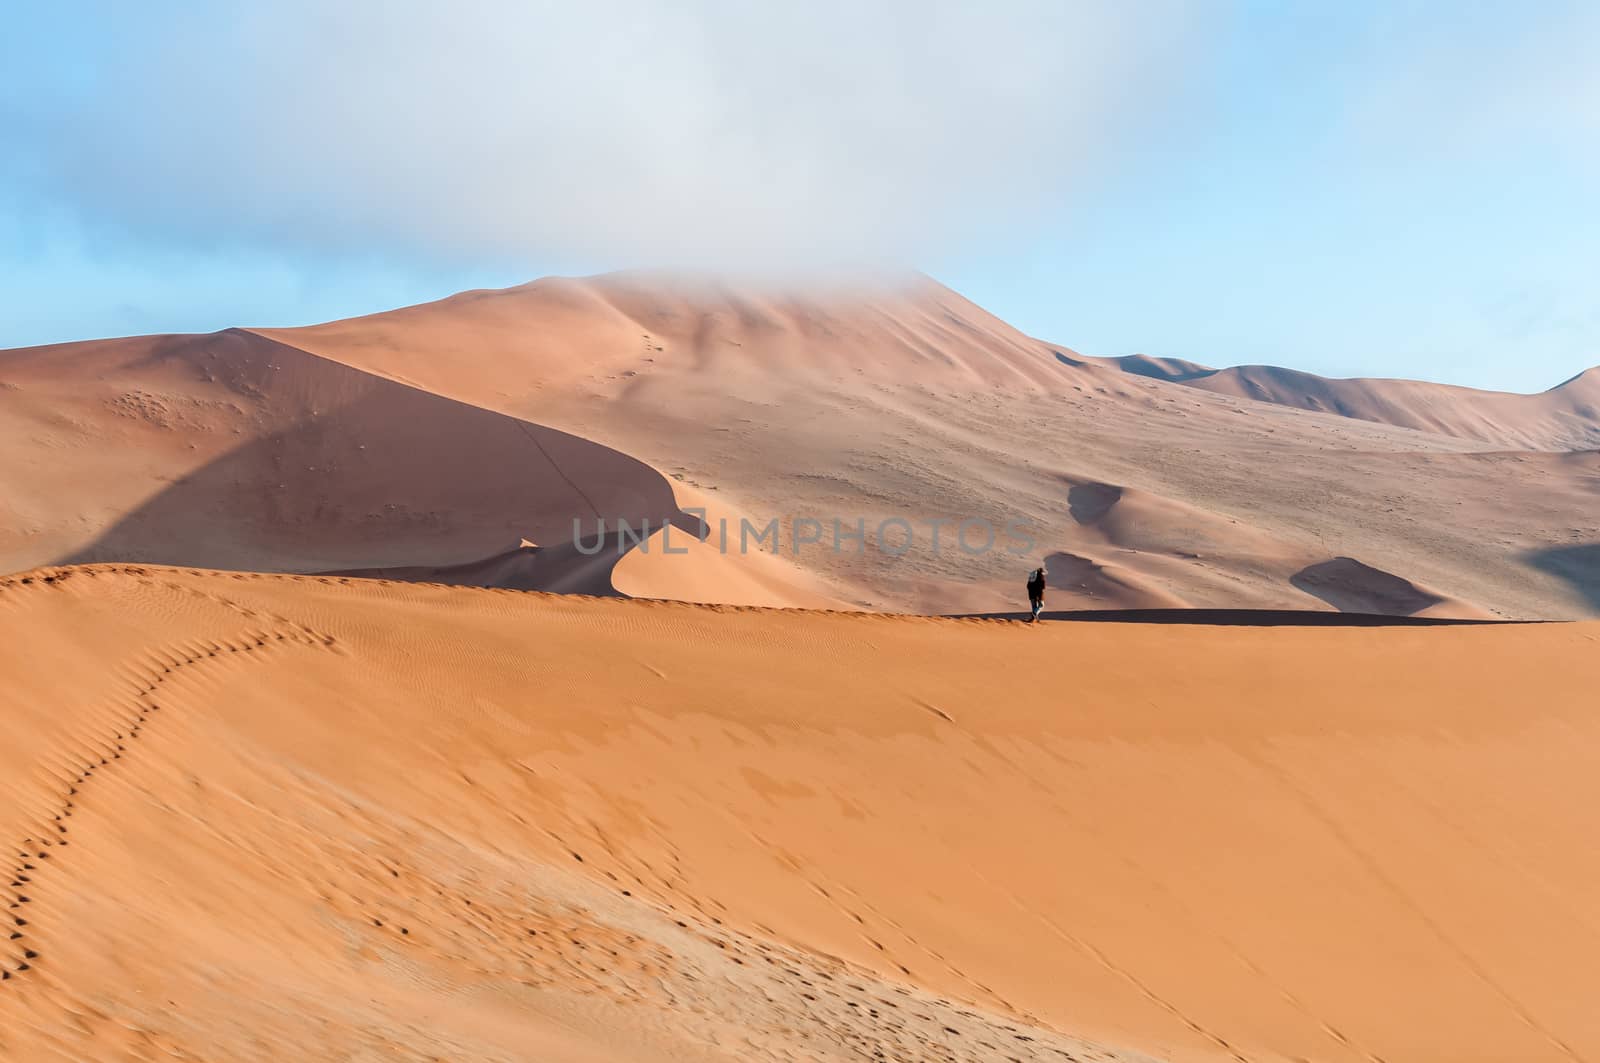 View from the sickle shaped sand dune next to Sossusvlei towards the north. Sand dunes and a tourist are visible